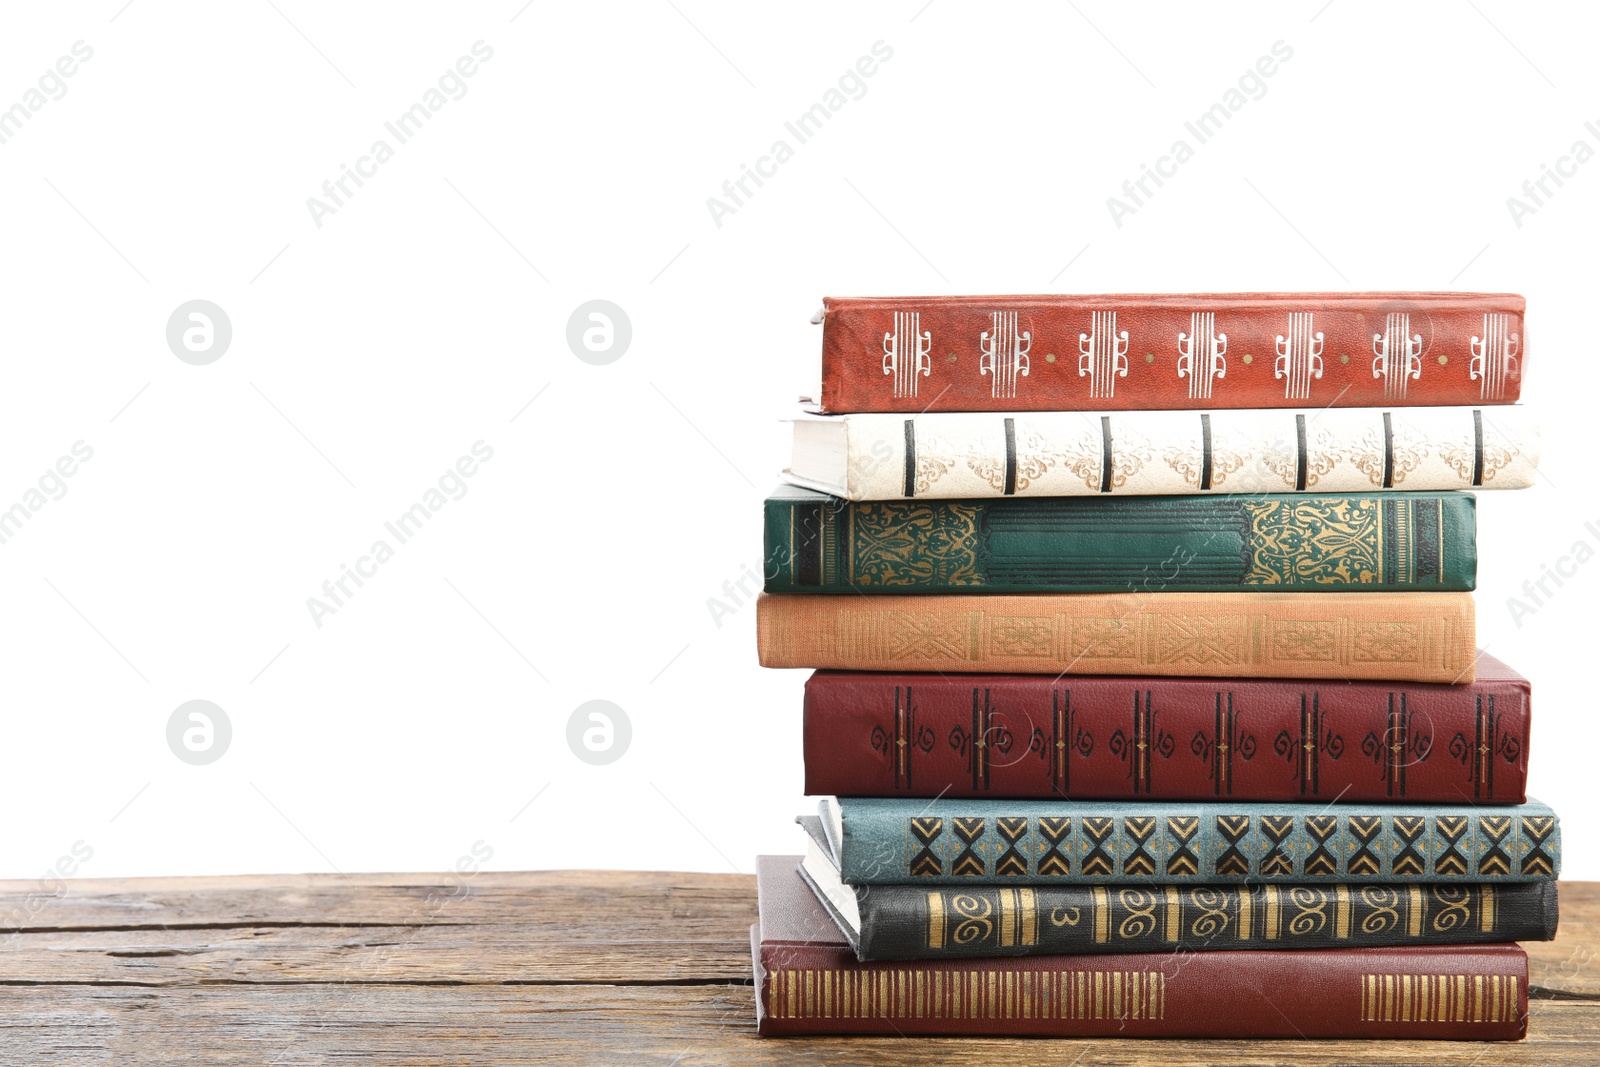 Photo of Stack of old vintage books on wooden table against white background